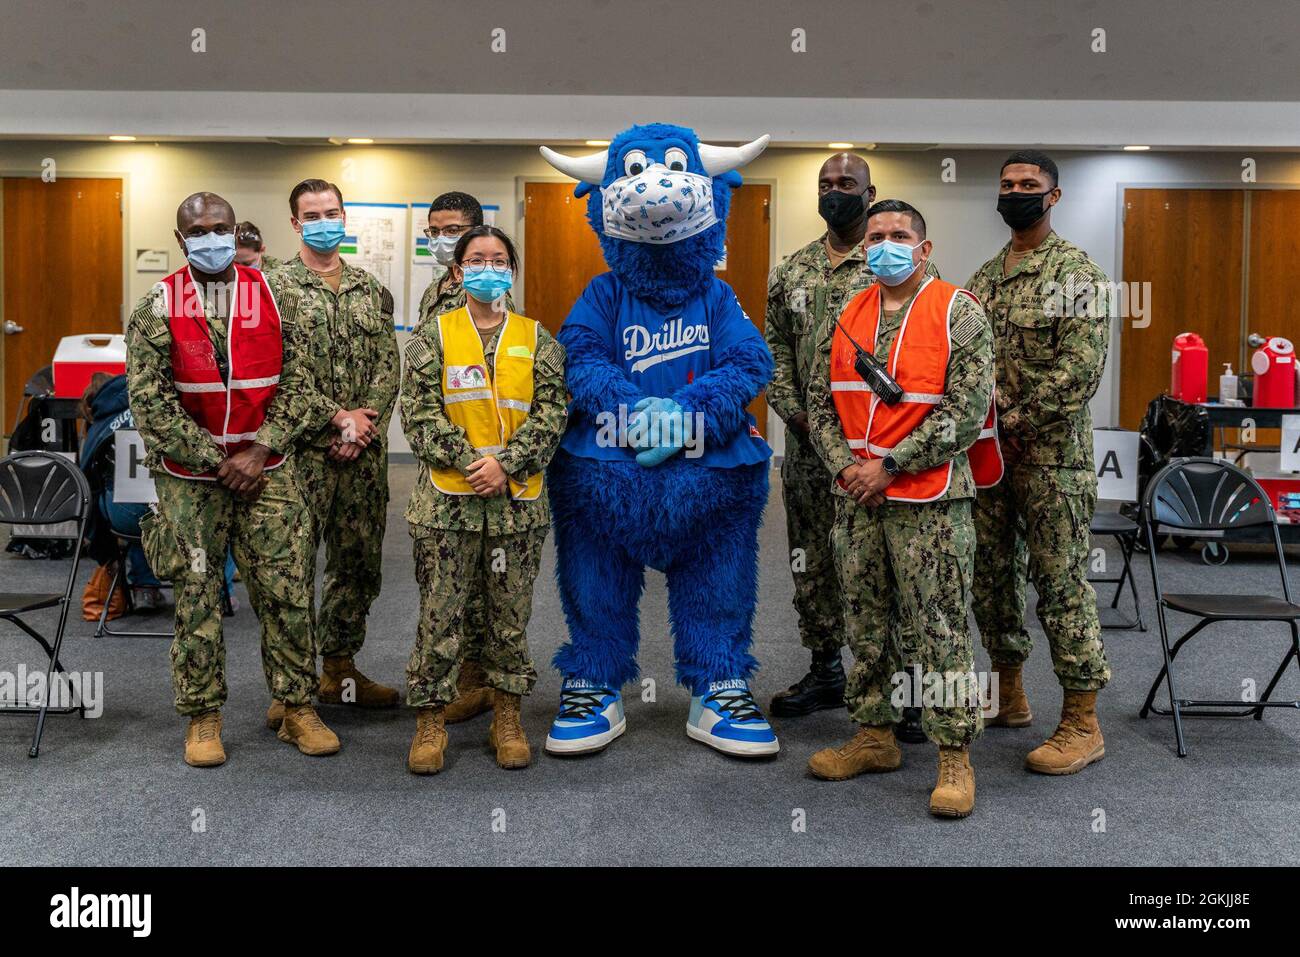 U.S. Navy Sailors assigned to the Naval Medical Readiness Training Command (NMRTC) San Diego pose with the Tulsa Drillers mascot, Hornsby the Bull, during his tour of the Community Vaccination Center (CVC) at the Tulsa Community College Northeast Campus in Tulsa, Oklahoma, May 5, 2021. Sailors assigned to NMRTC San Diego will support daily vaccination operations at the Tulsa CVC. U.S. Northern Command, through U.S. Army North, remains committed to providing continued, flexible Department of Defense support to the Federal Emergency Management Agency as part of the whole-of-government response t Stock Photo